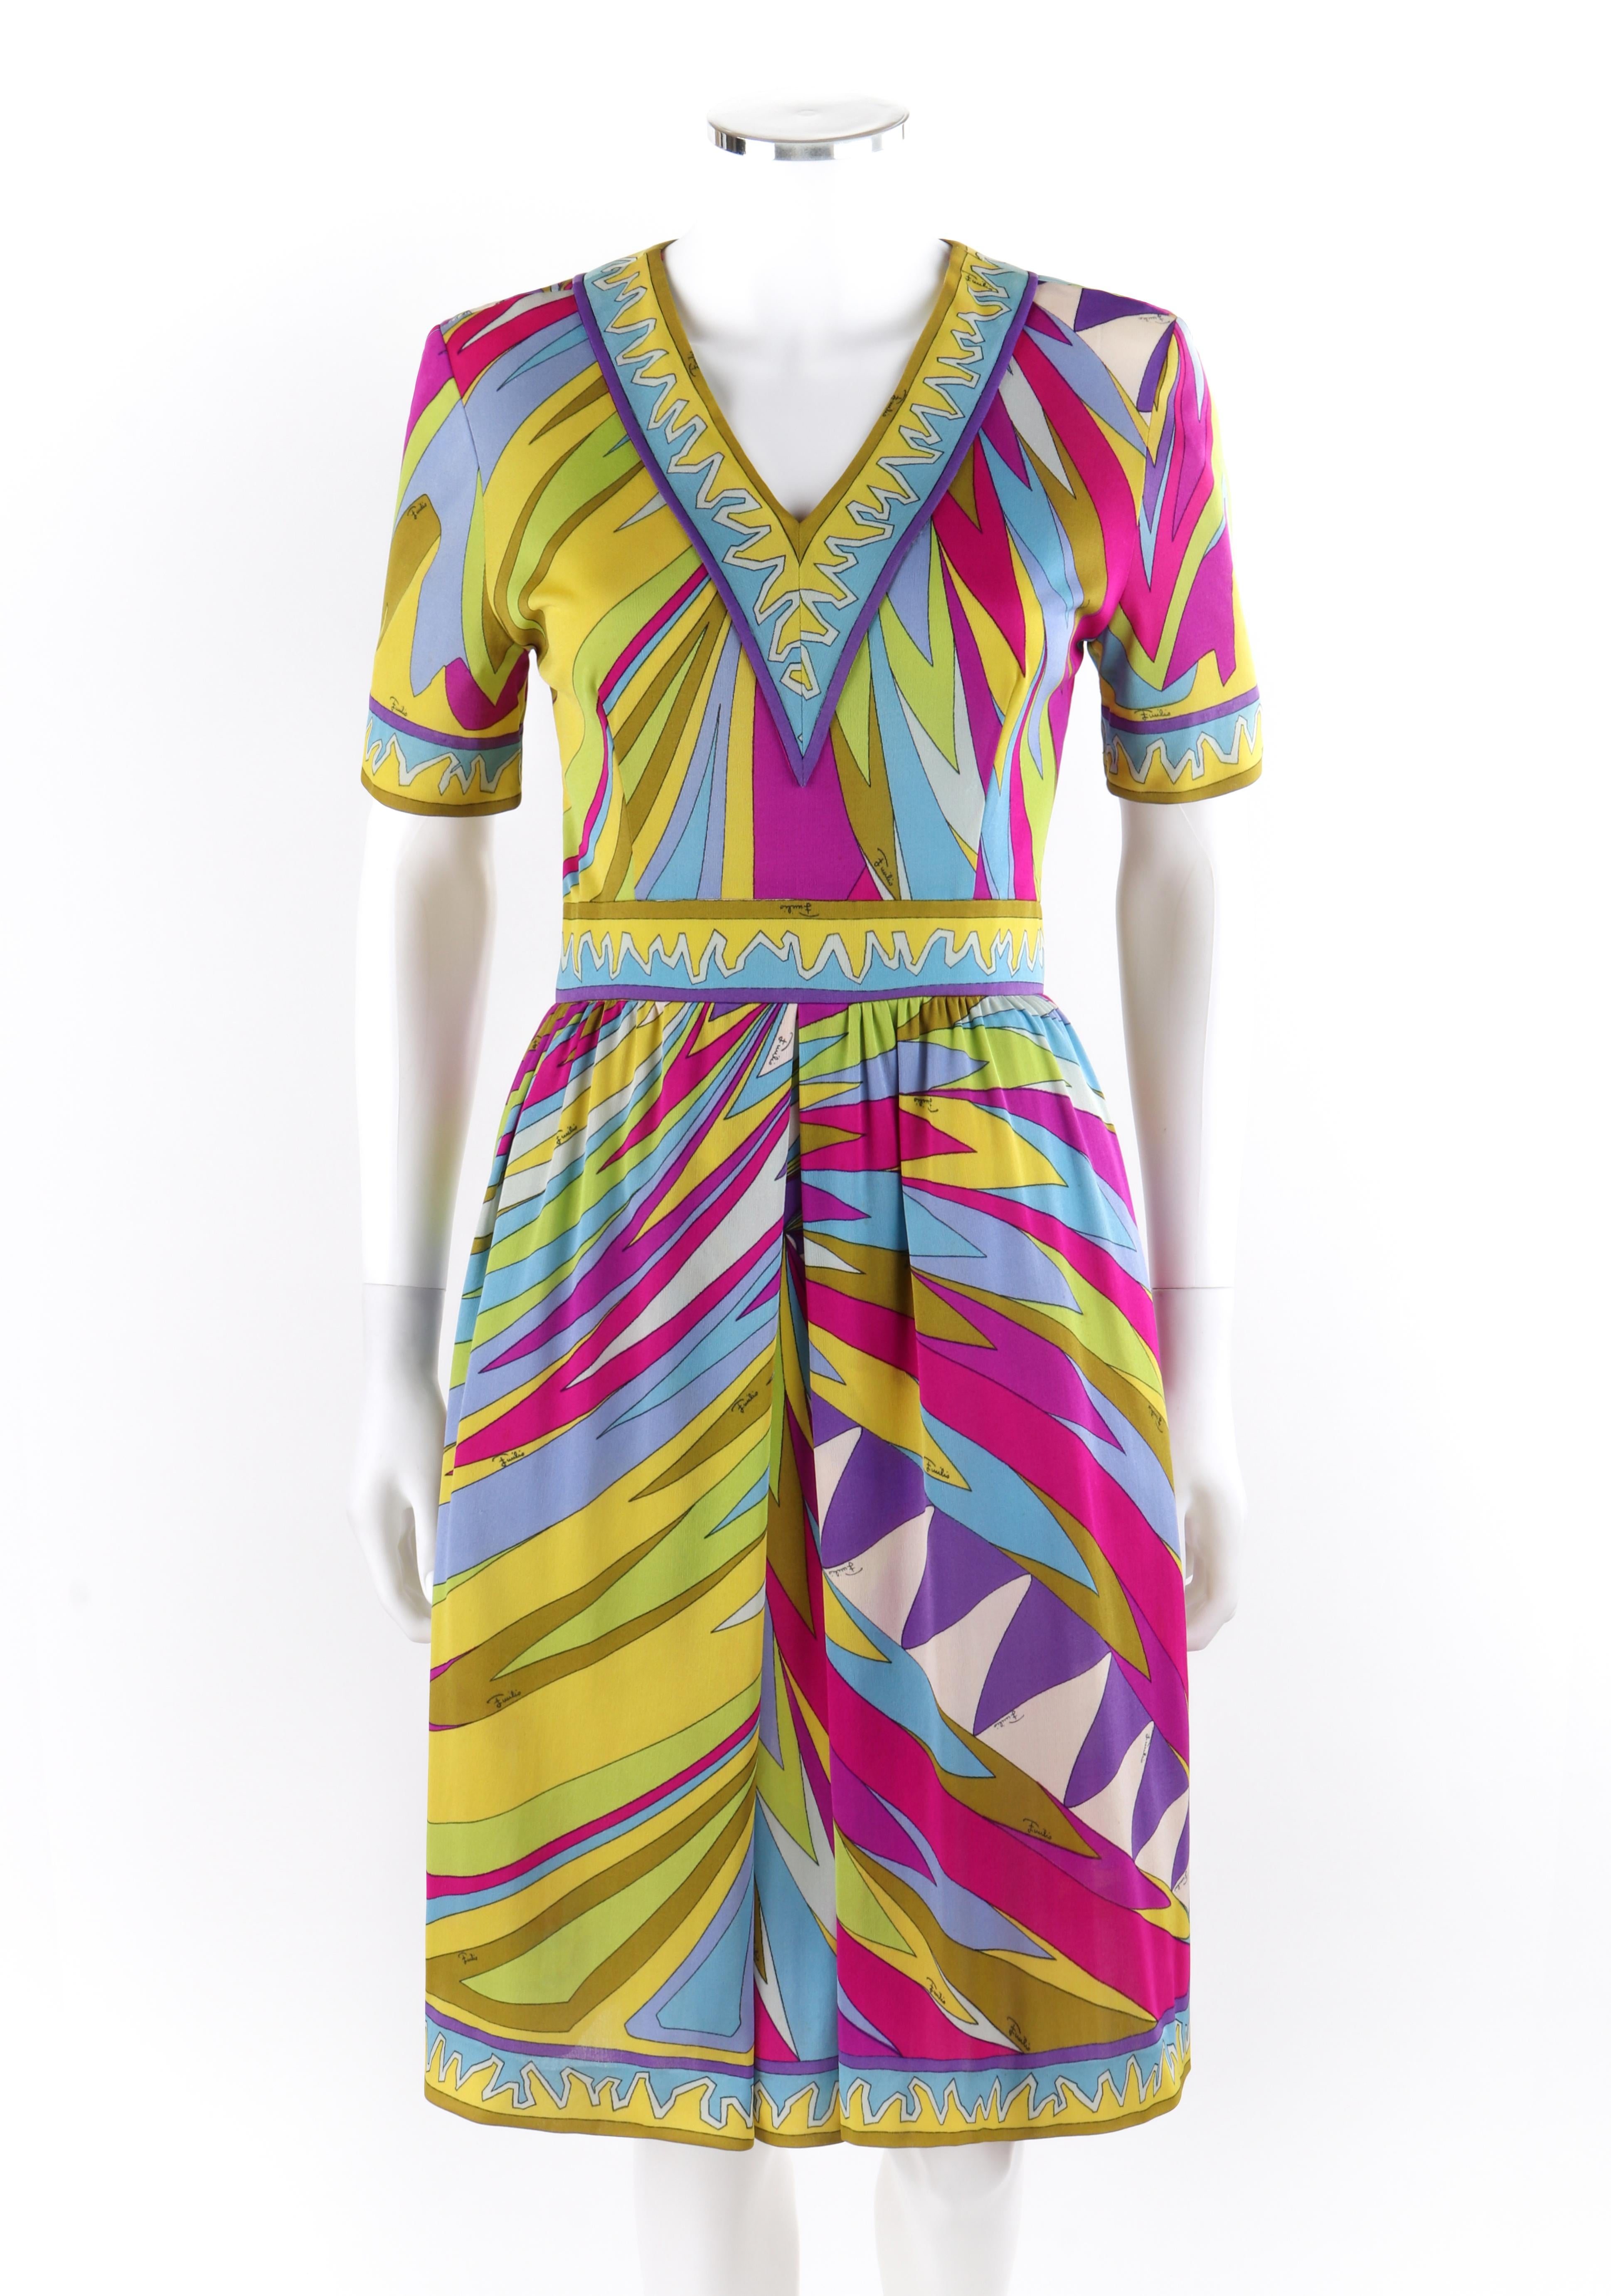 EMILIO PUCCI c.1960's Abstract Stripe Op Art Signature Print V-Neck Sheath Dress
 
Circa: 1960’s
Label(s): Neiman Marcus Trophy Room
Designer: Emilio Pucci
Style: Sheath dress
Color(s): Shades of pink, purple, green, blue, yellow, white
Lined: